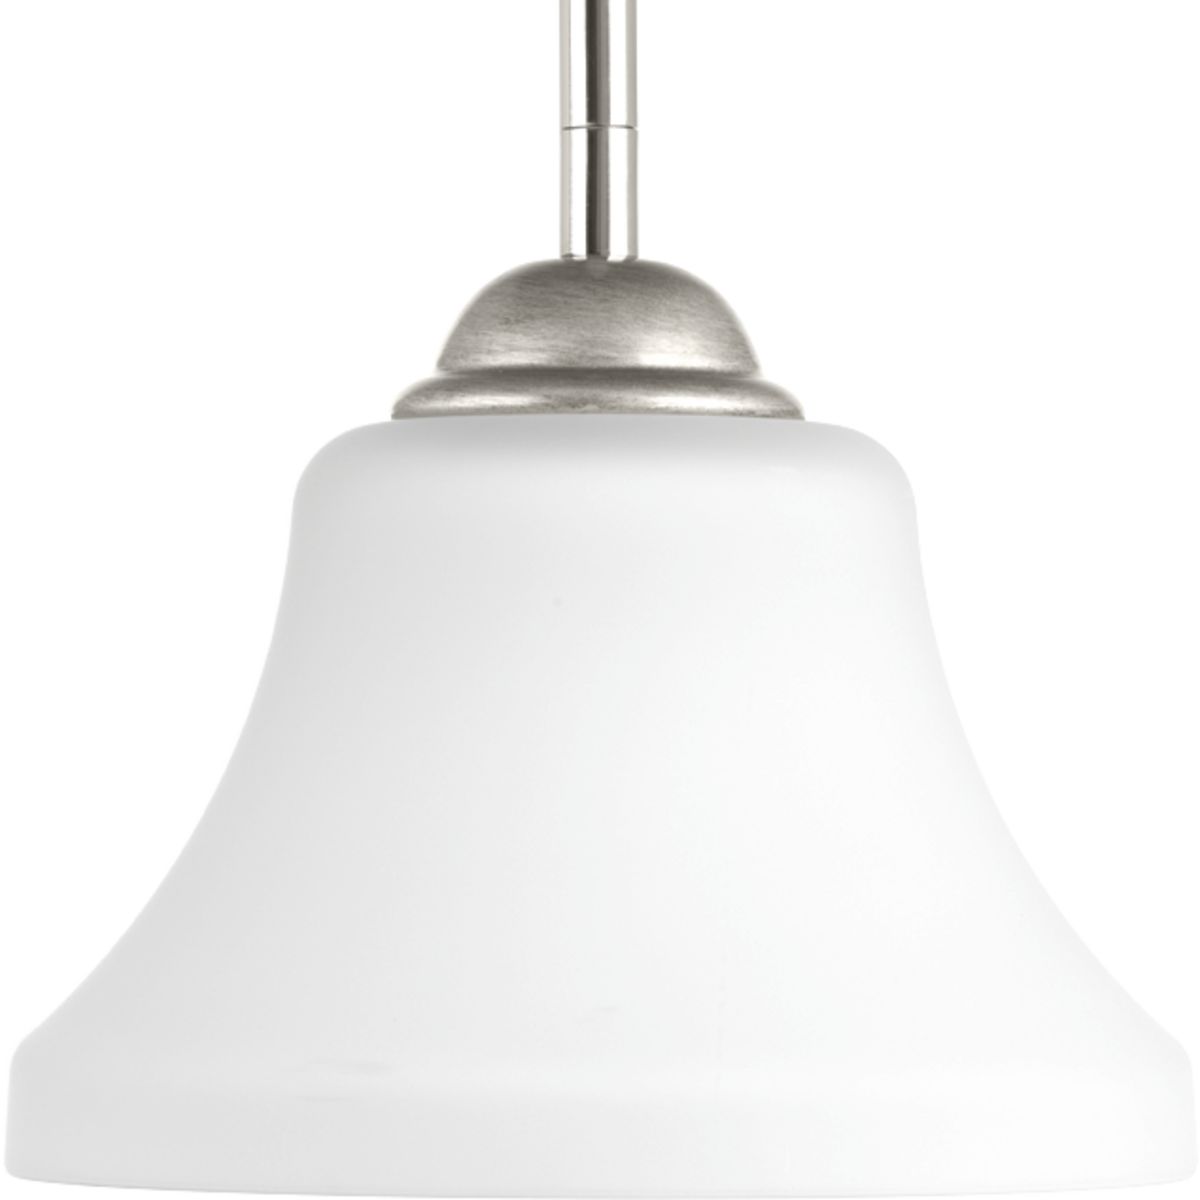 P500007-104 785247206148 Mixed finishes of Polished Nickel with Silver Ridge accents are highlighted in Noma. The one-light mini-pendant with etched white glass is part of our Design Series collections.